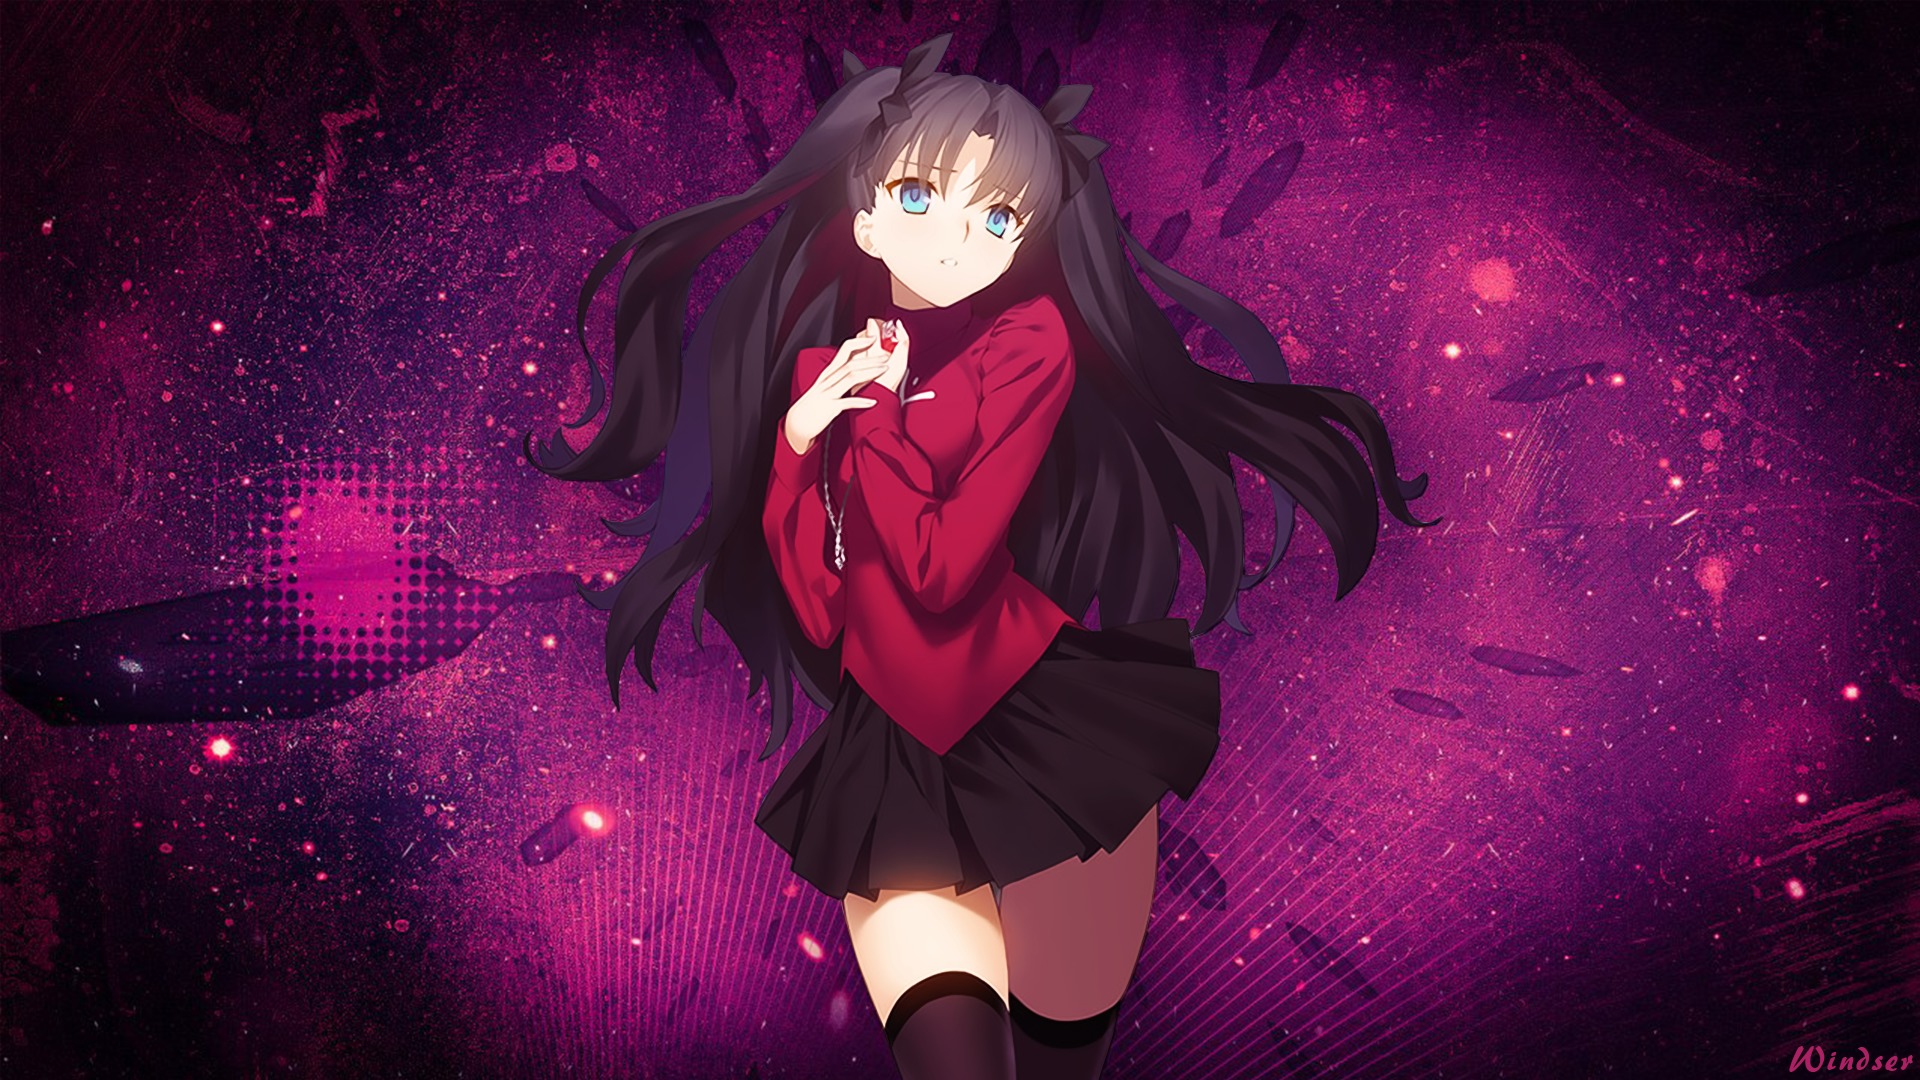 Rin Tohsaka Fate Stay Night Unlimited Blade Works Wallpaper Hd Anime 4k Wallpapers Images Photos And Background